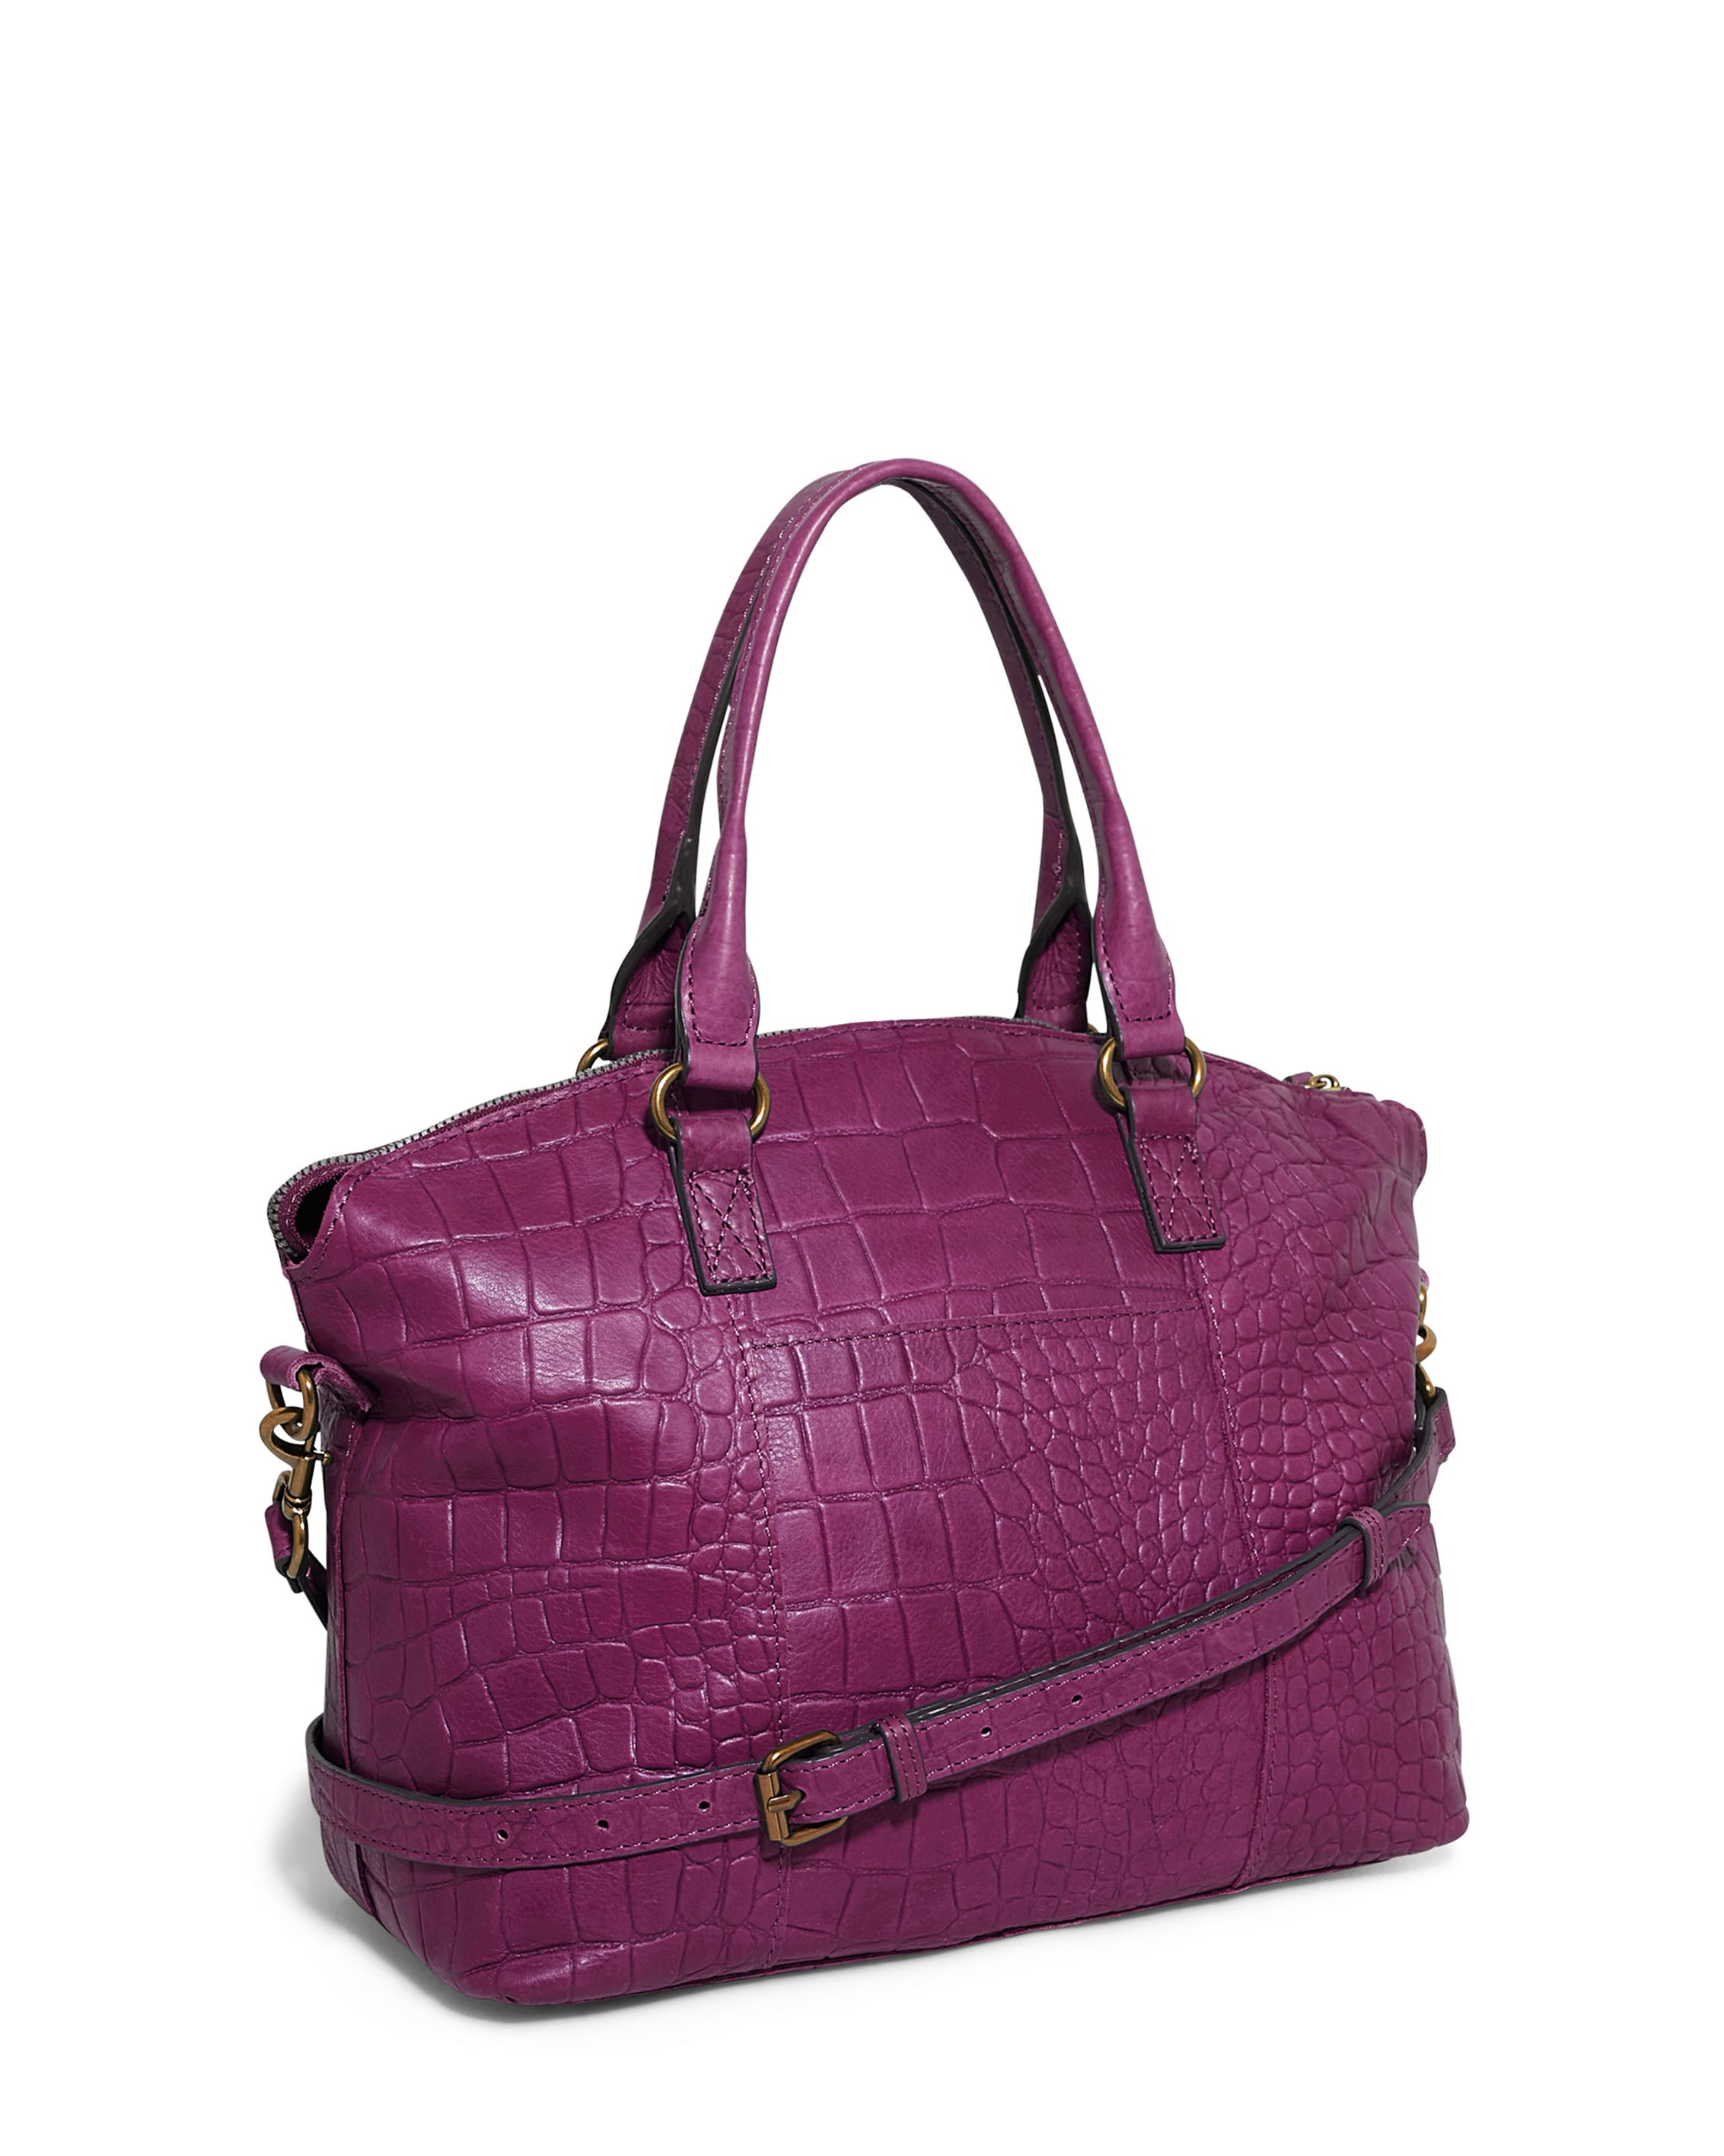 American Leather Co. Carrie Dome Satchel Deep Berry Croco